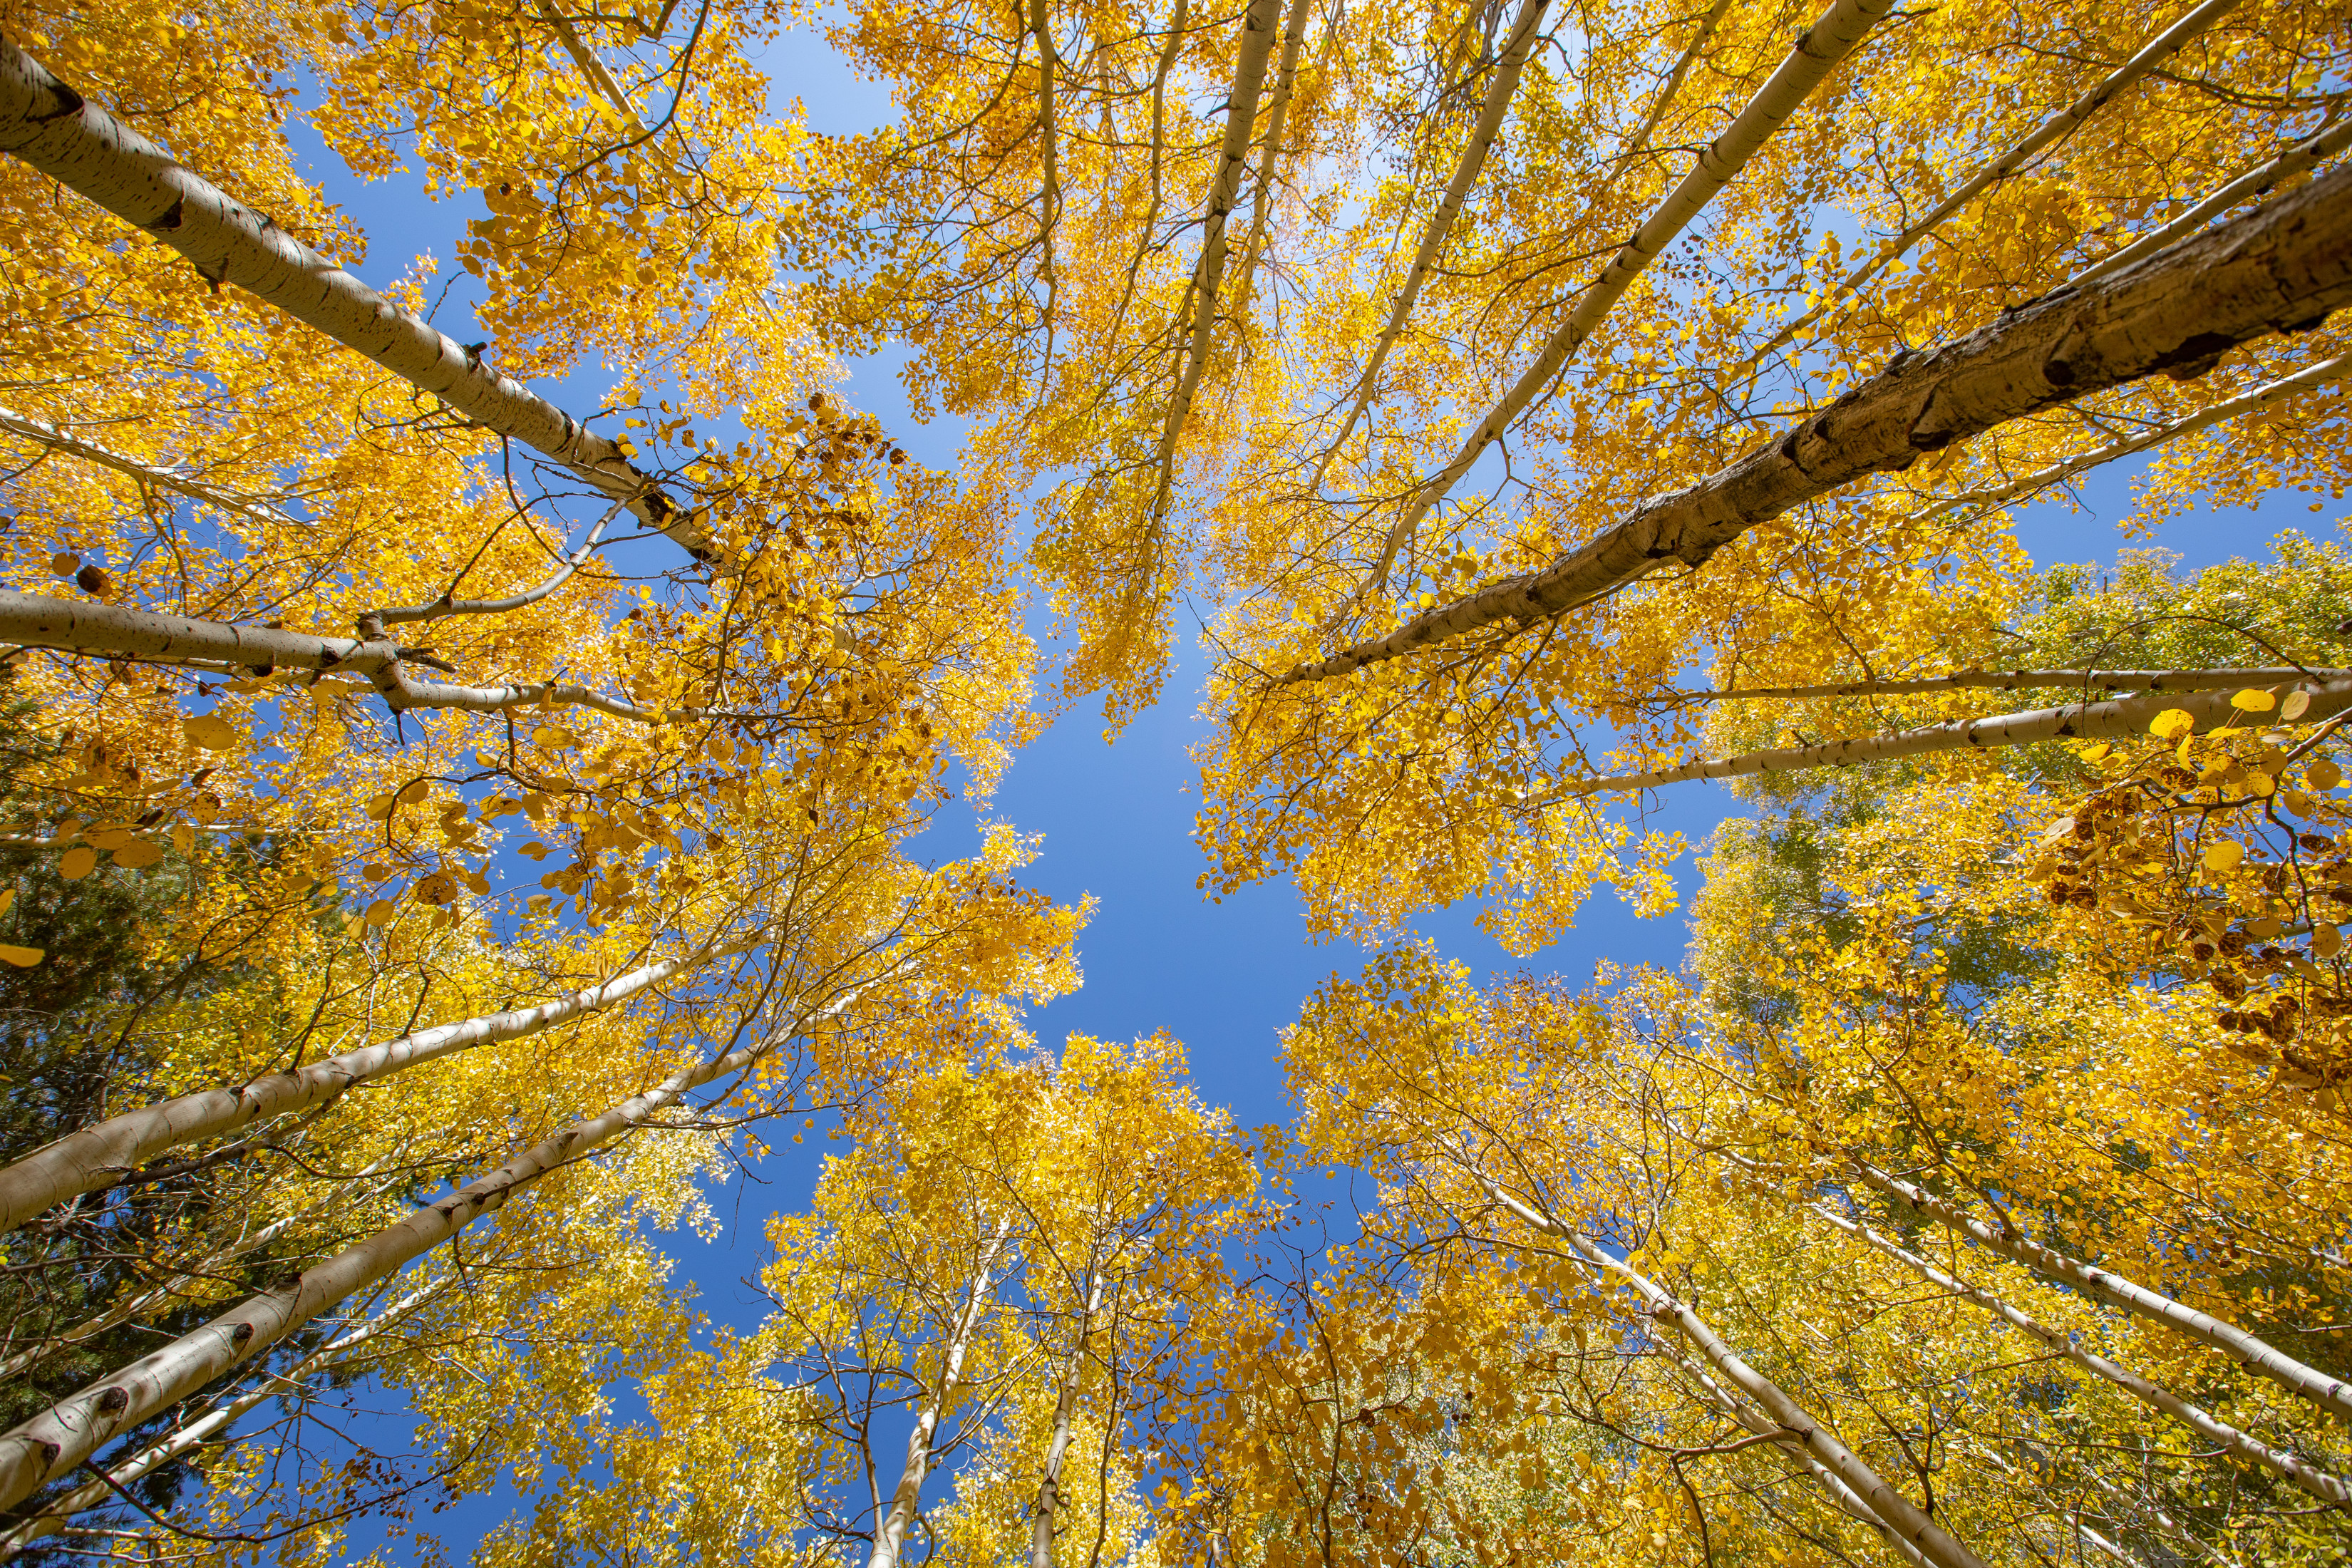 Looking up at aspen trees that turned gold in the fall.